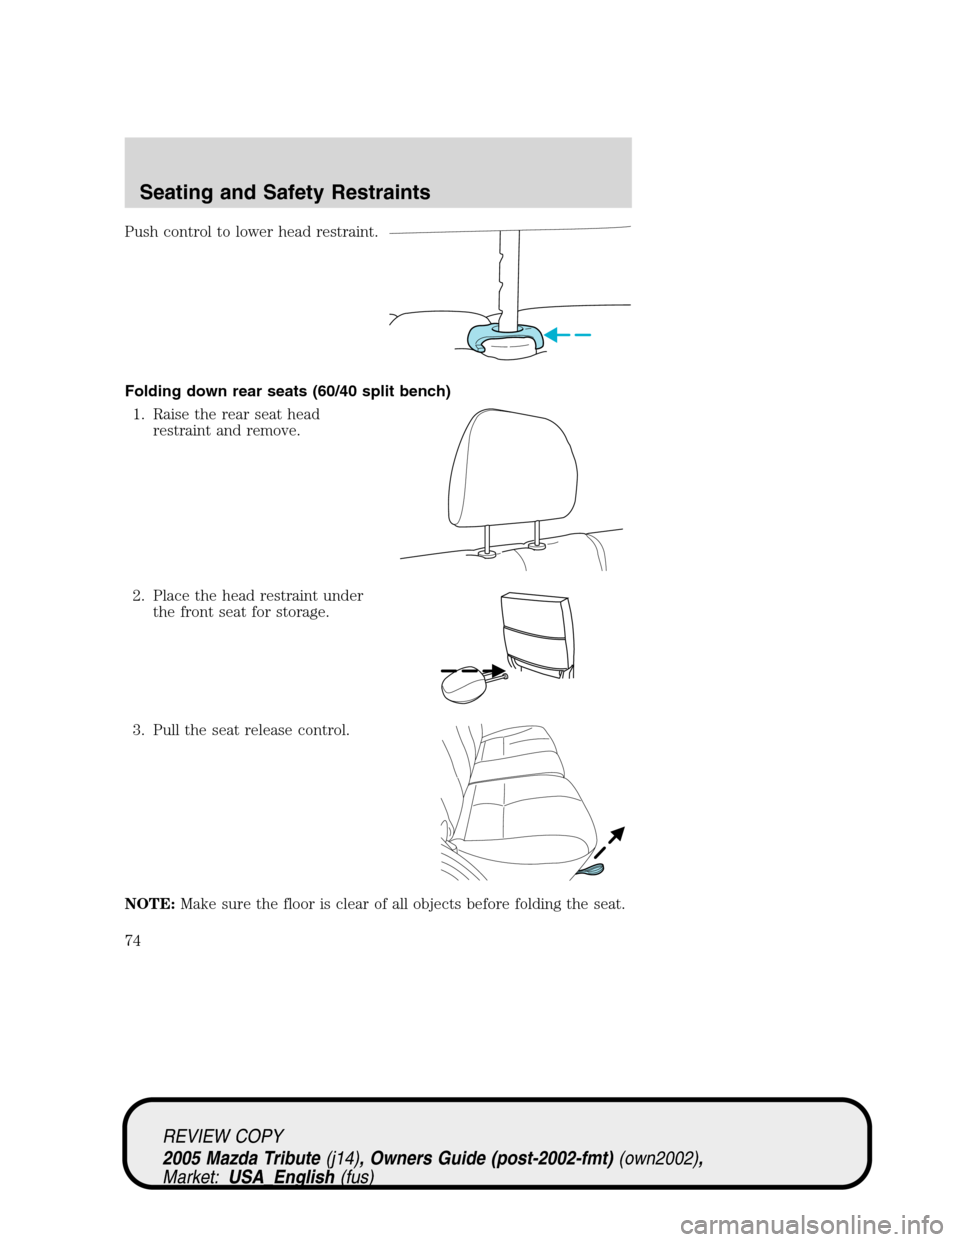 MAZDA MODEL TRIBUTE 2005  Owners Manual (in English) Push control to lower head restraint.
Folding down rear seats (60/40 split bench)
1. Raise the rear seat head
restraint and remove.
2. Place the head restraint under
the front seat for storage.
3. Pul